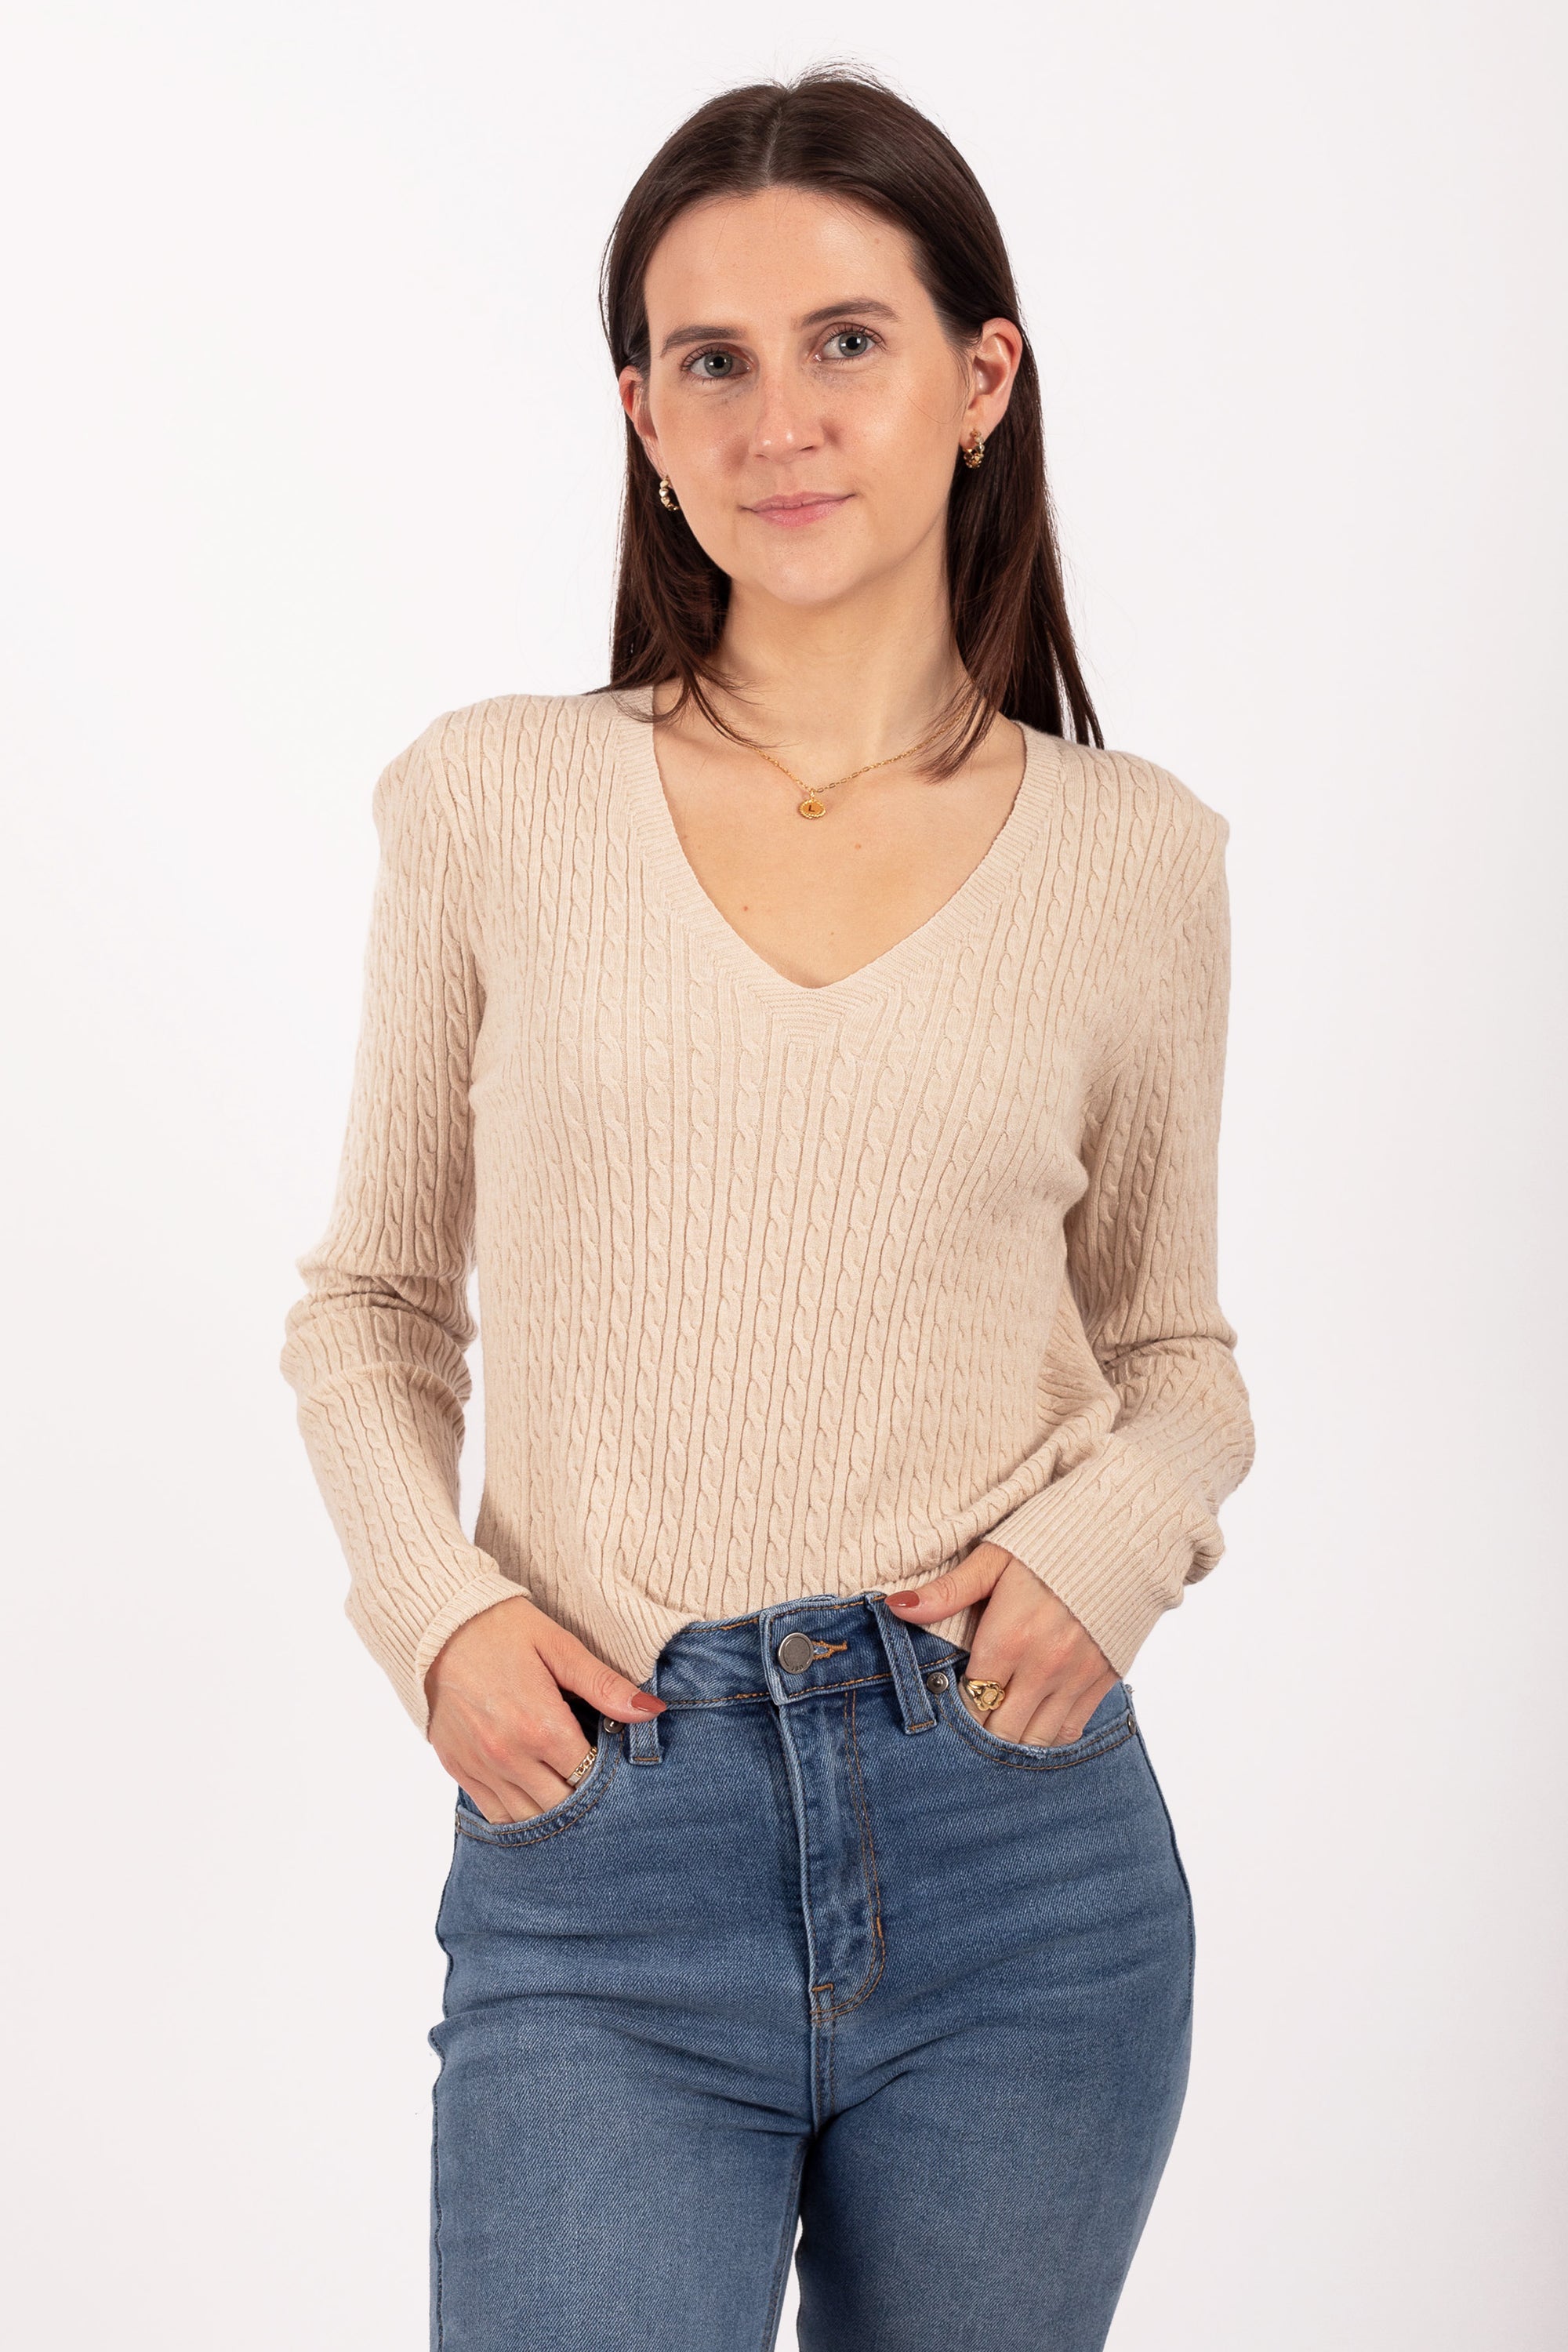 Tan Cable Knit Sweater Top